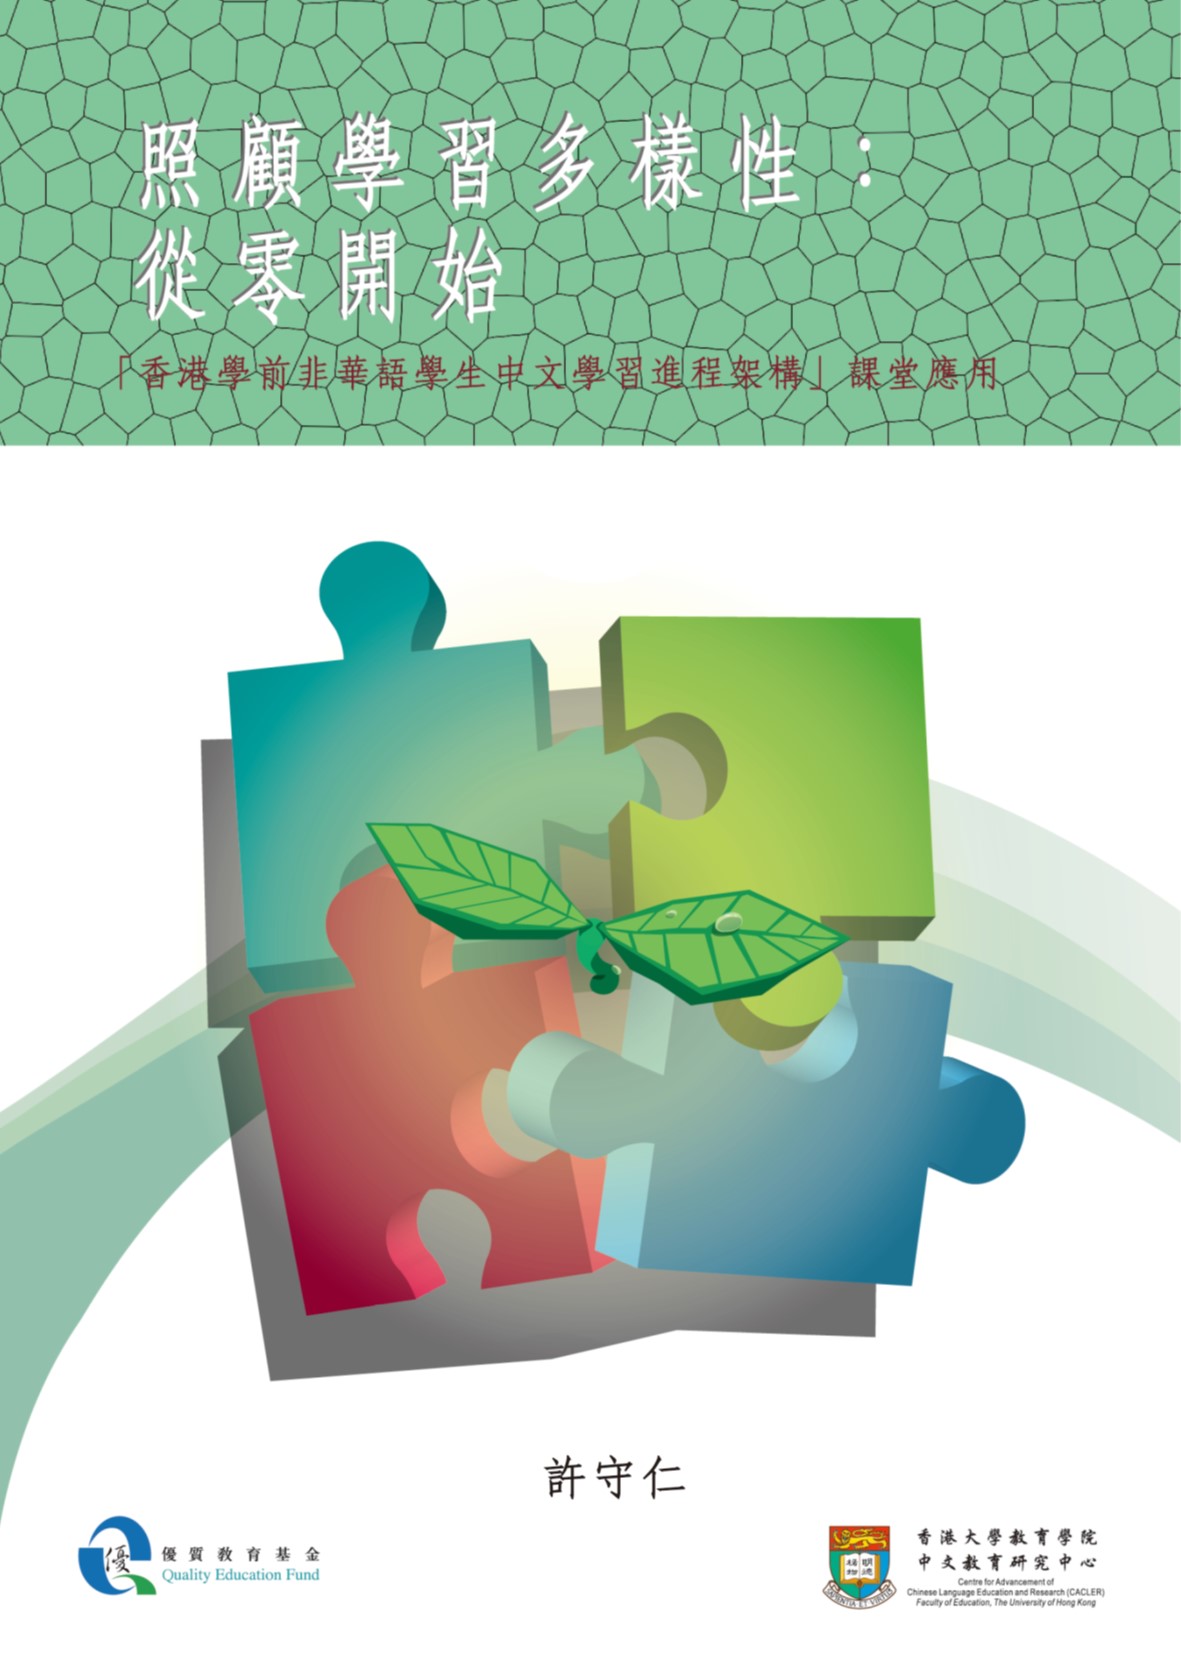 Catering for learner diversity from the beginning: A handbook on the application of the “Chinese Language Learning Progression Framework for Non-Chinese Speaking Children in Kindergartens in Hong Kong&amp;quot;